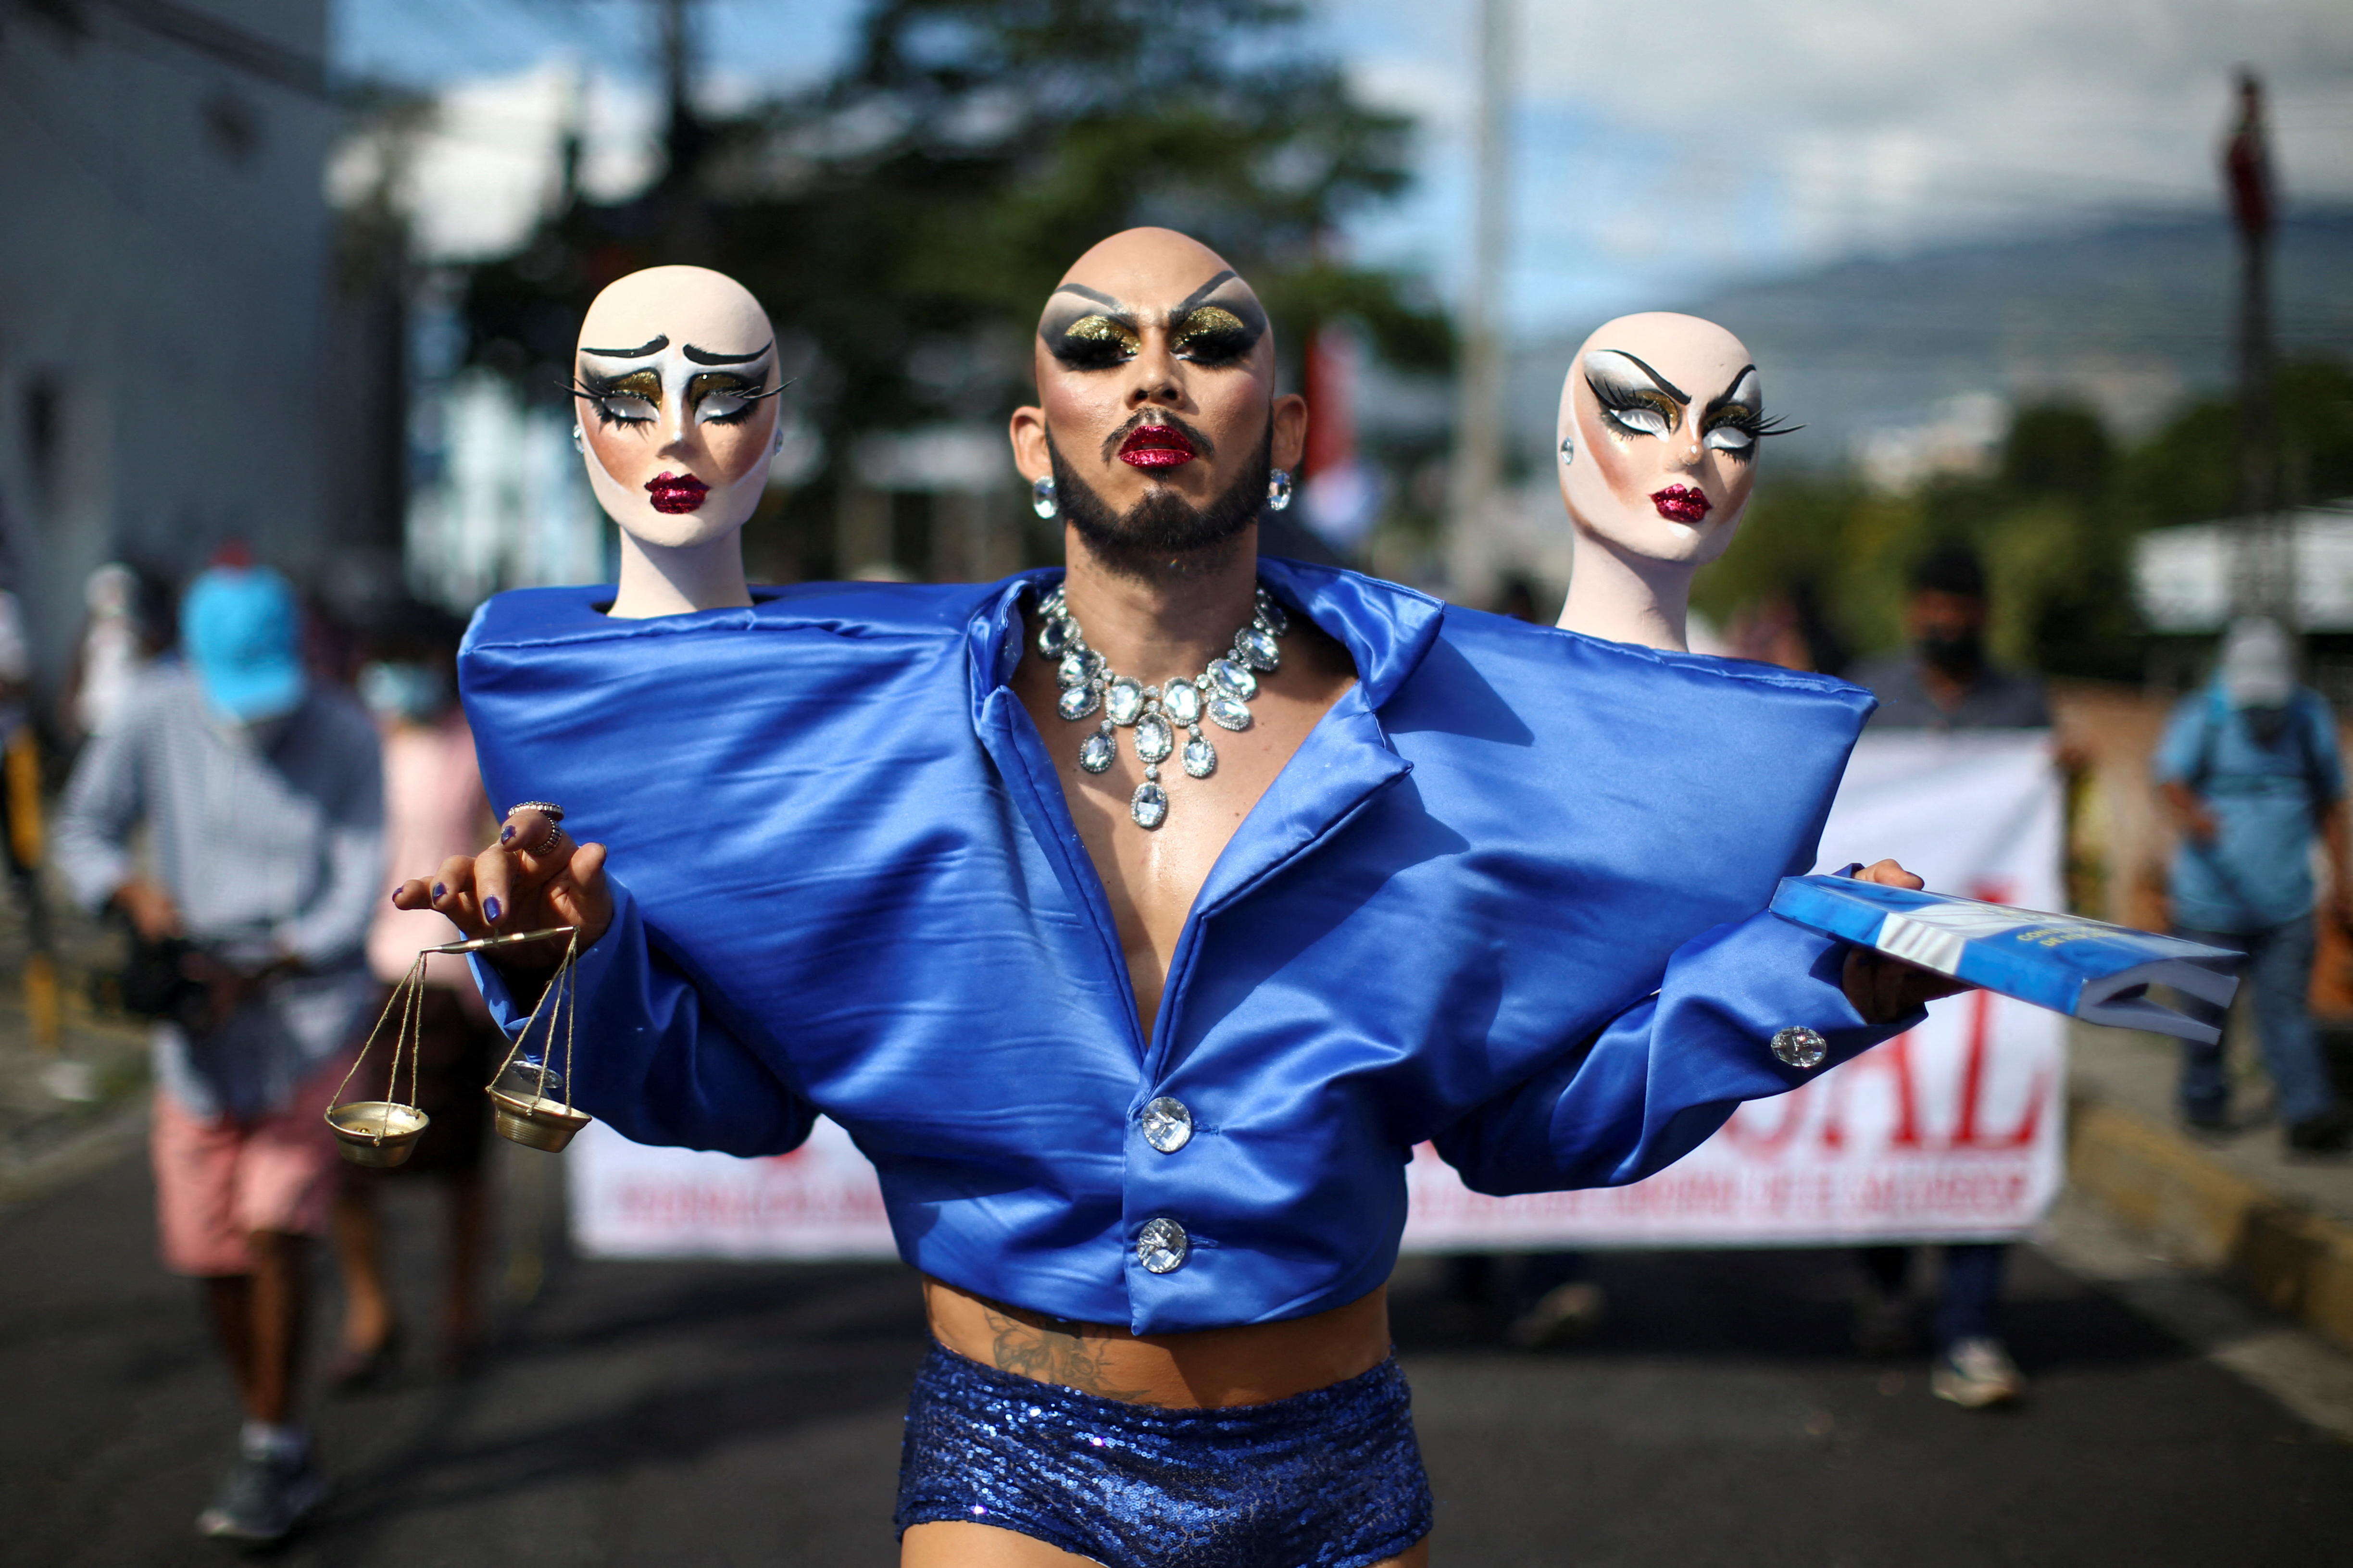 Marvin Pleitez aka Lady Drag participates in protests against Salvadoran government's latest actions